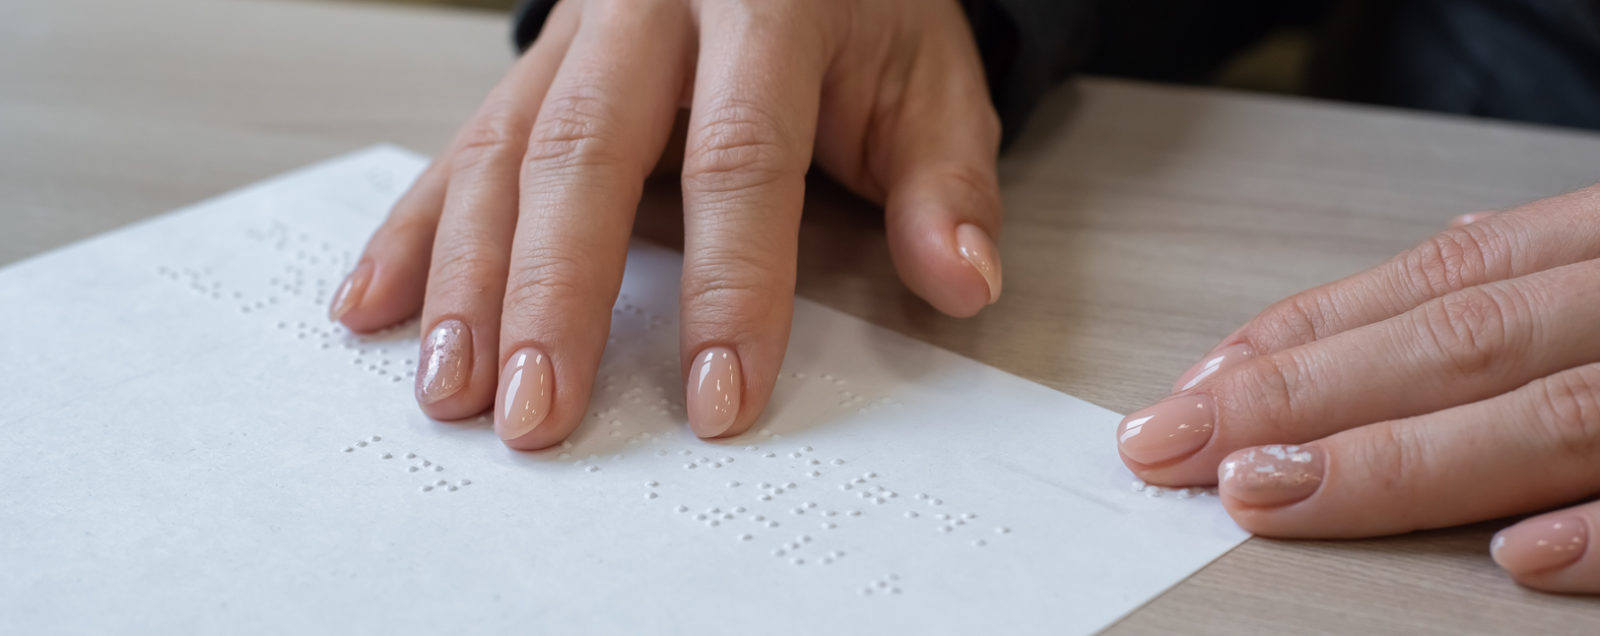 Two hands reading Braille